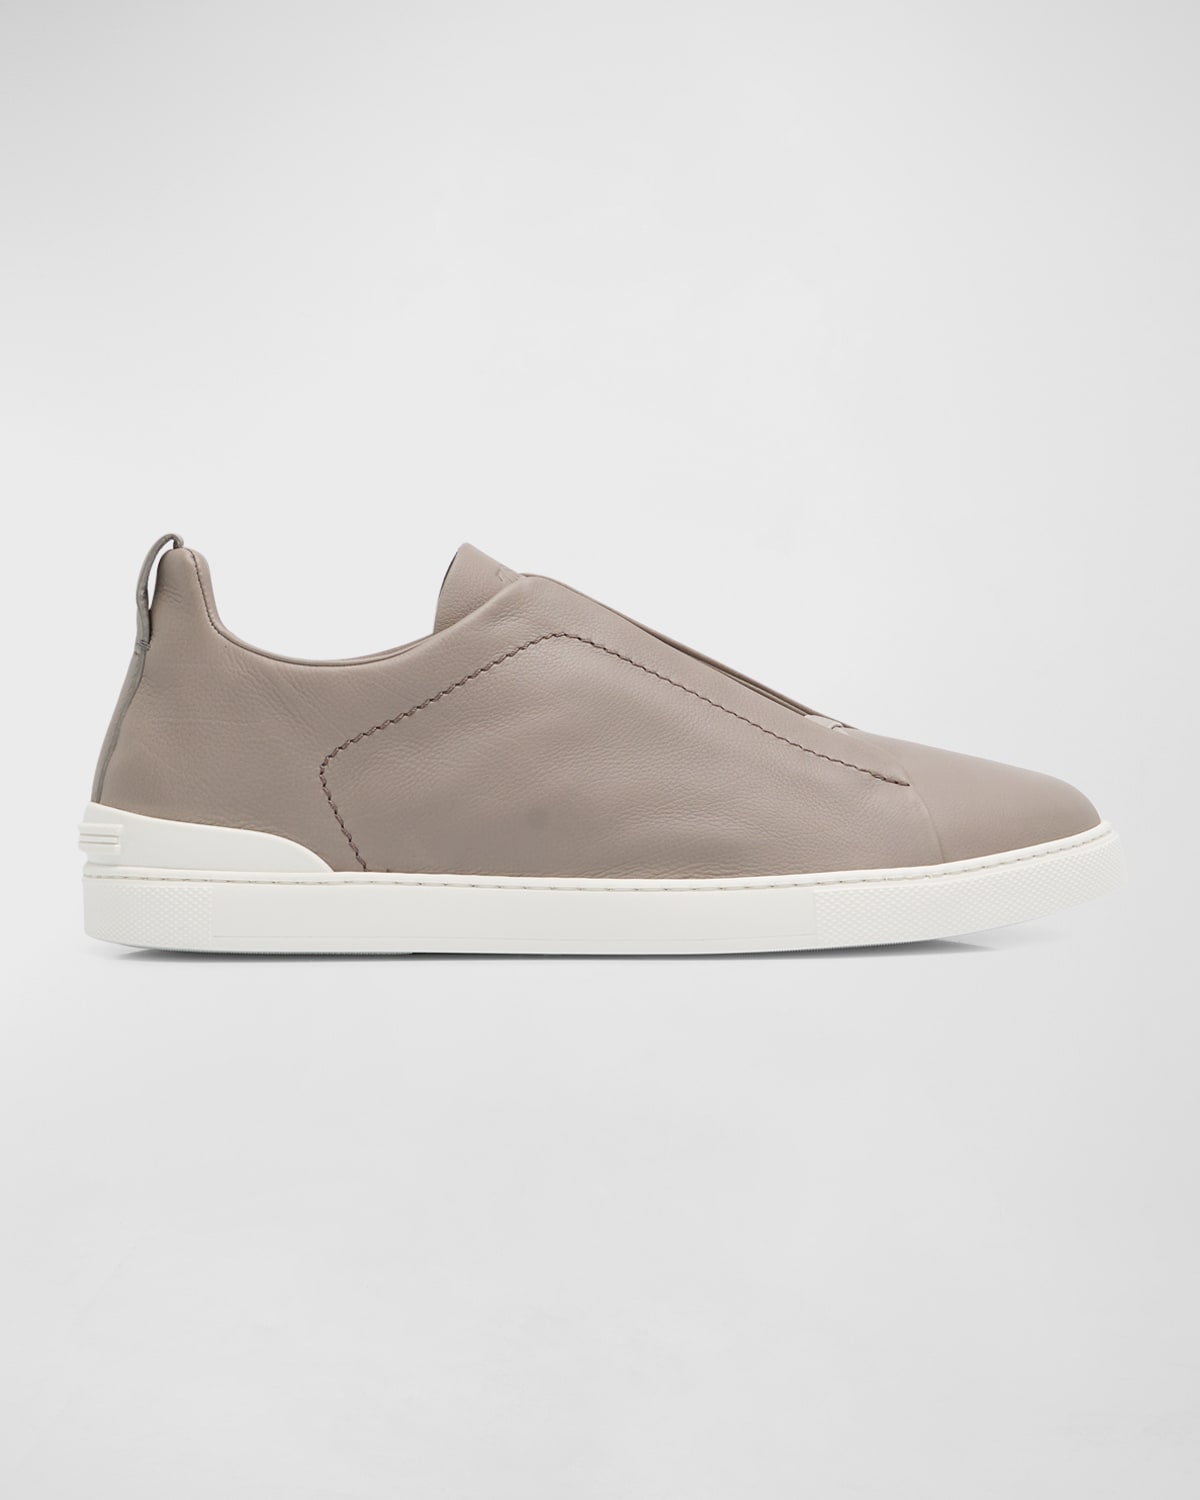 ZEGNA MEN'S TRIPLE STITCH™ SLIP-ON SOFT CALF LEATHER LOW-TOP SNEAKERS